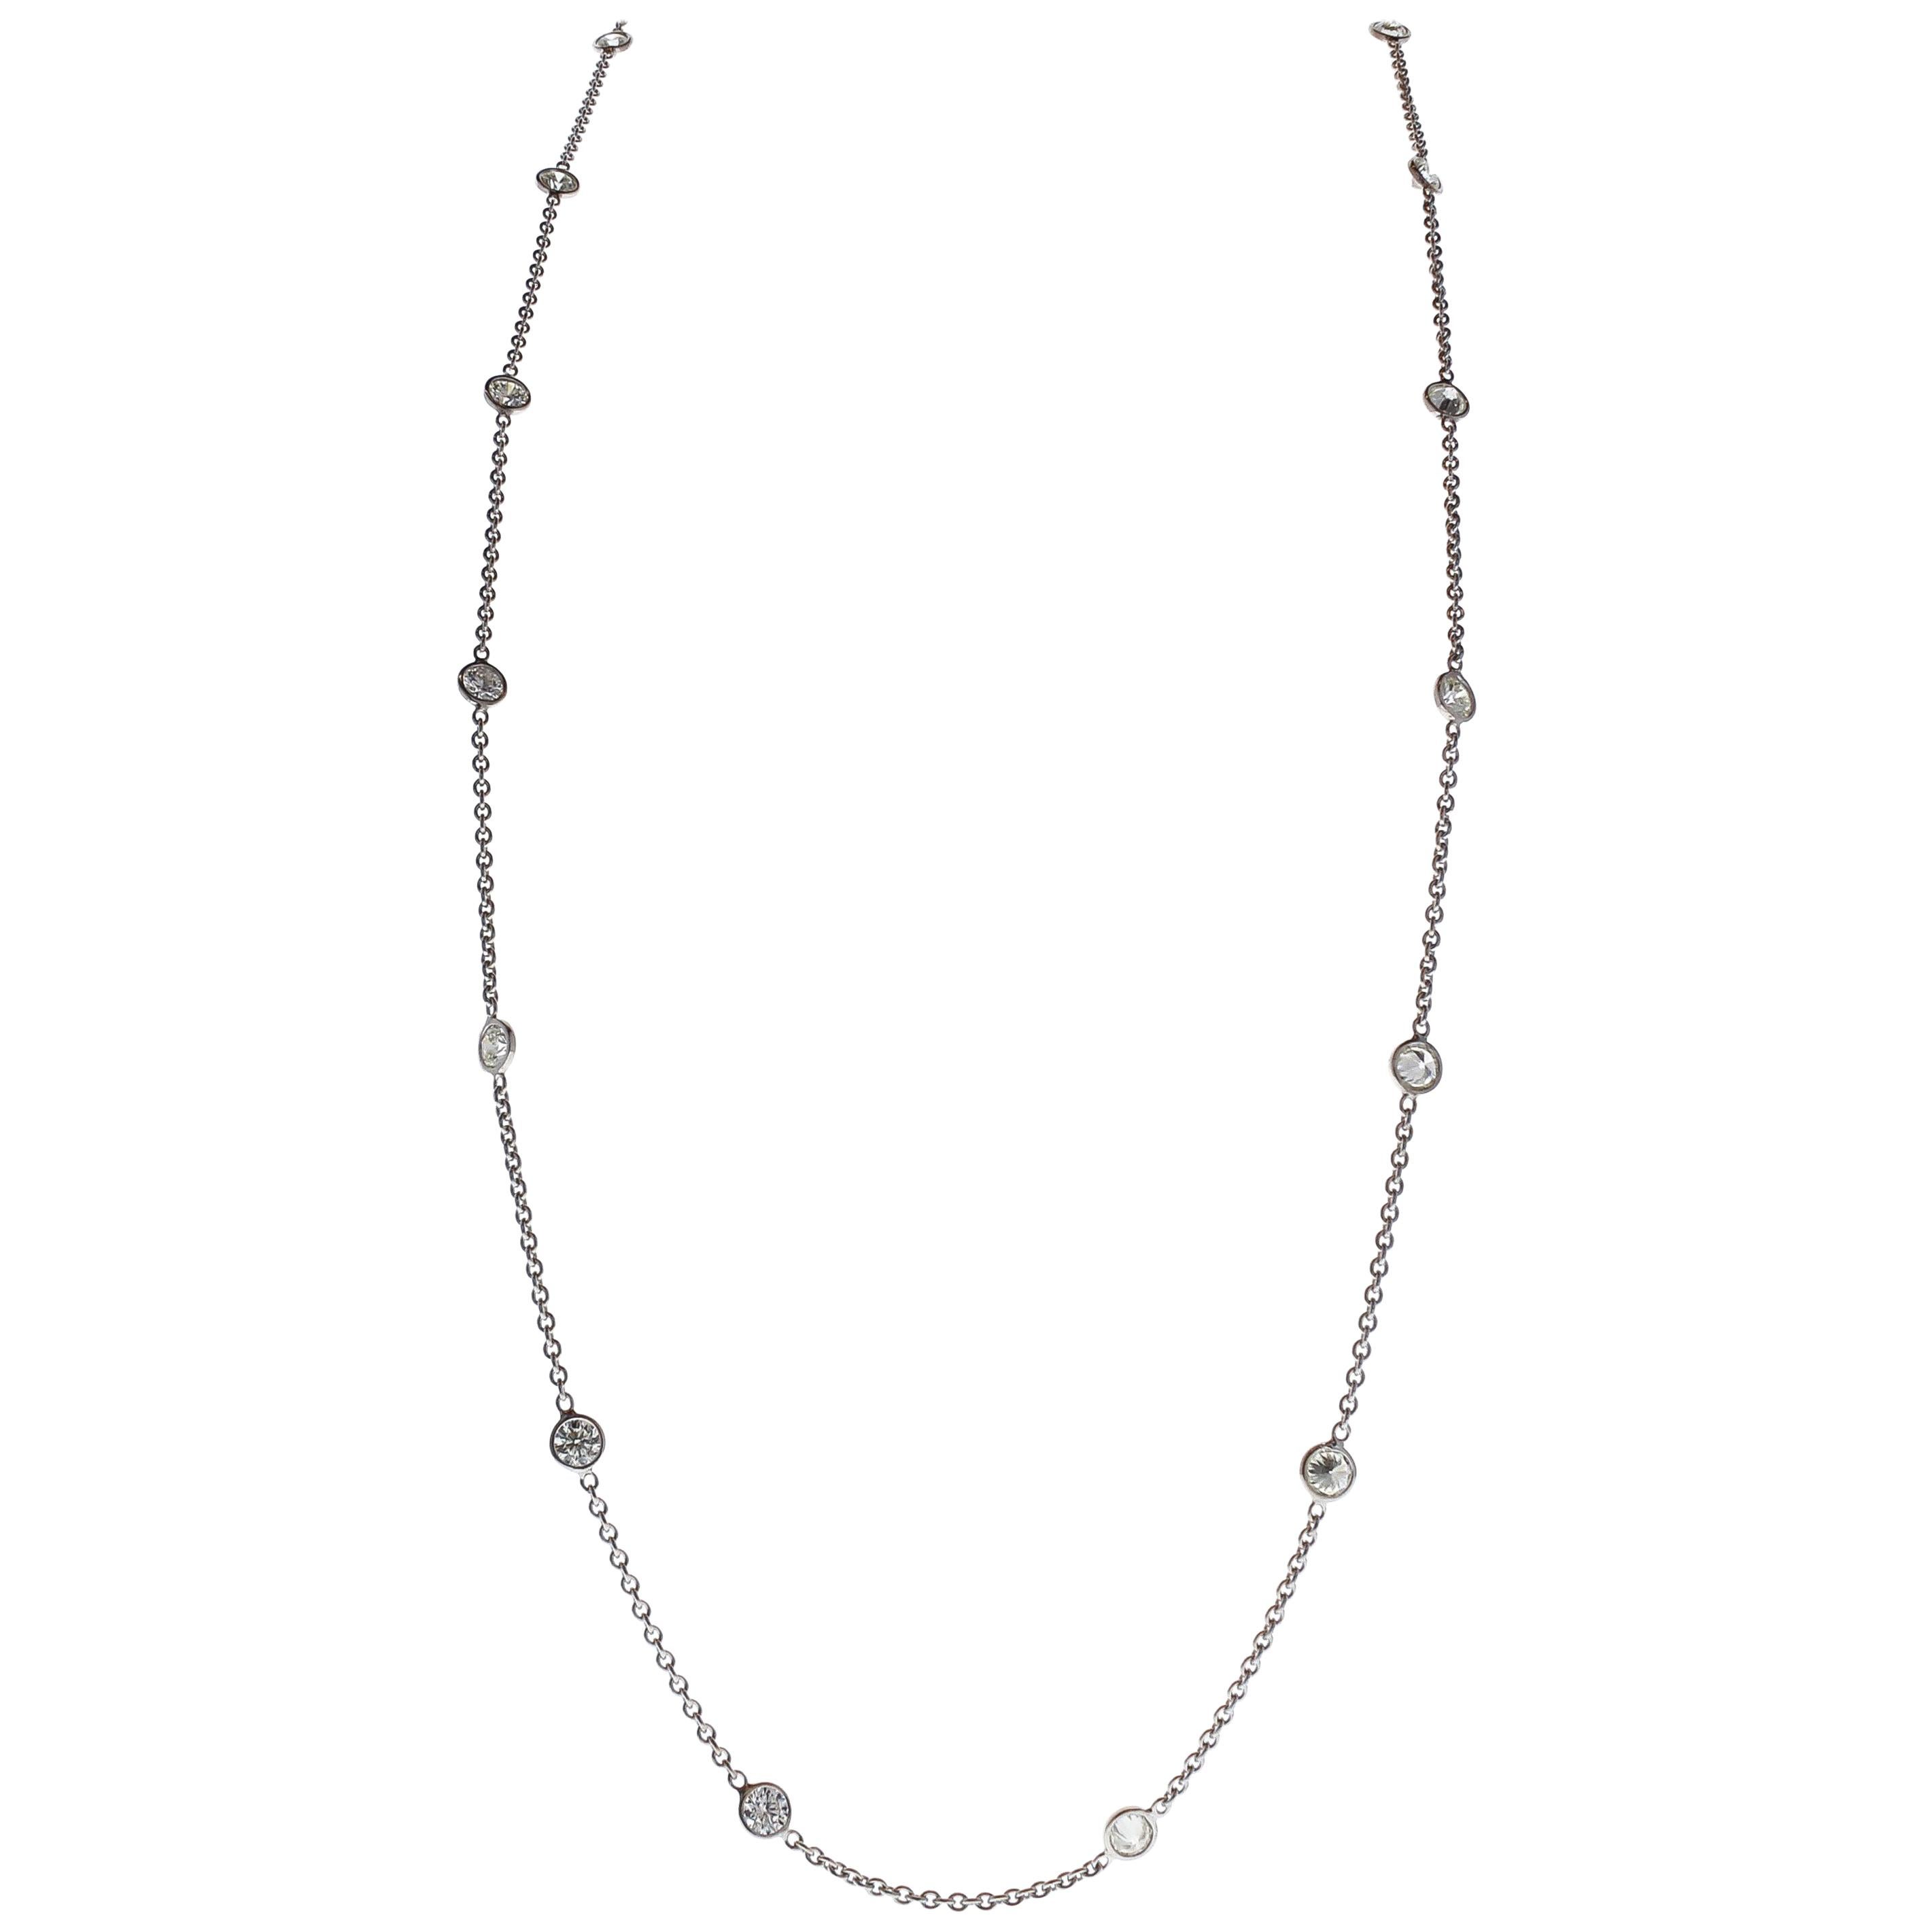 2.81 Carat Total Diamonds by the Yard Necklace in 14 Karat White Gold For Sale